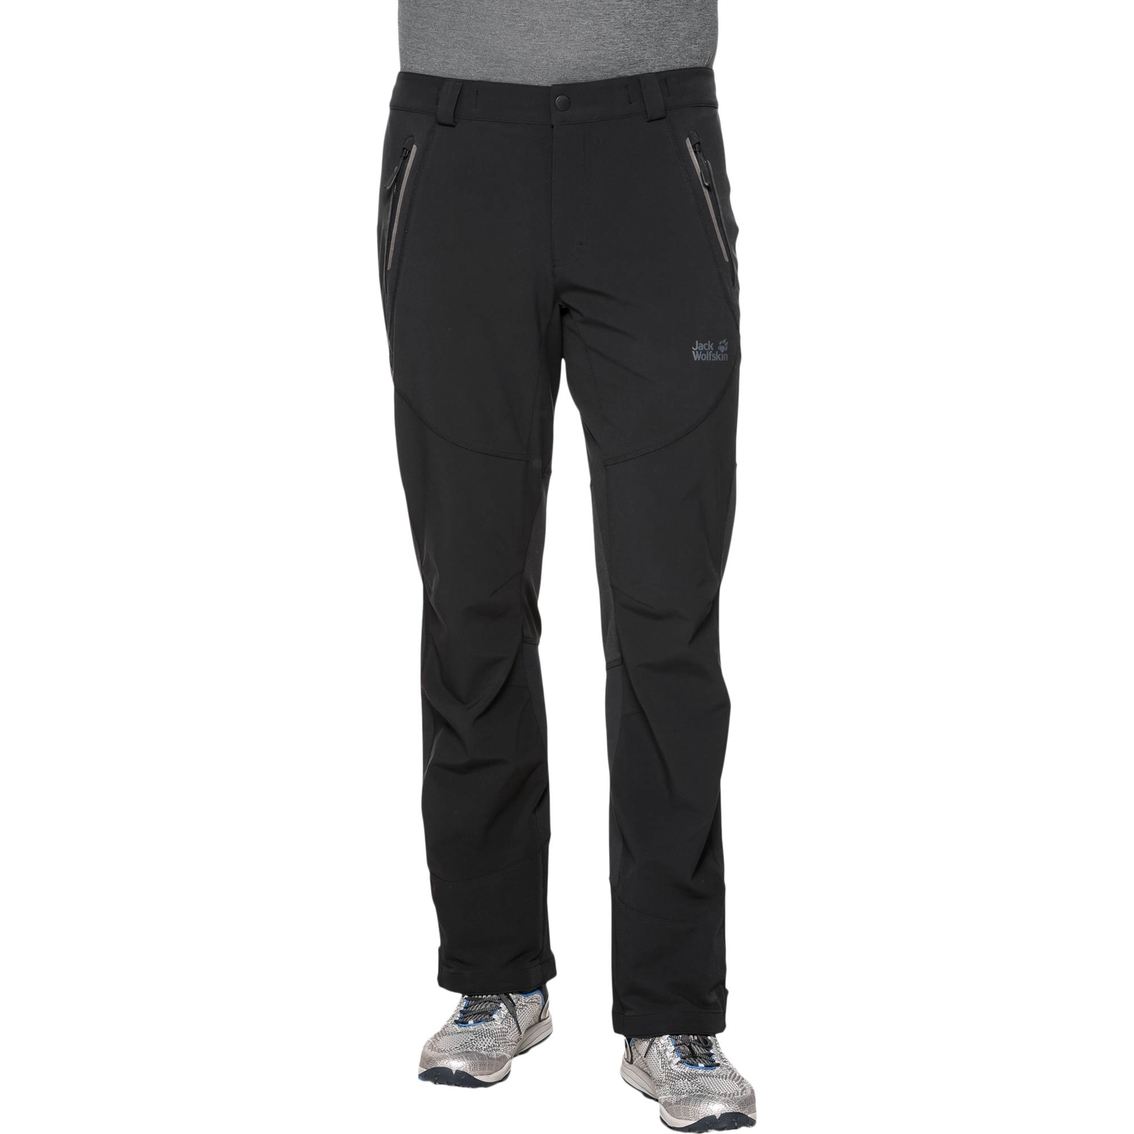 Jack Wolfskin Gravity Slope Pants & Clothing | Accessories Pants Shop | The Exchange 